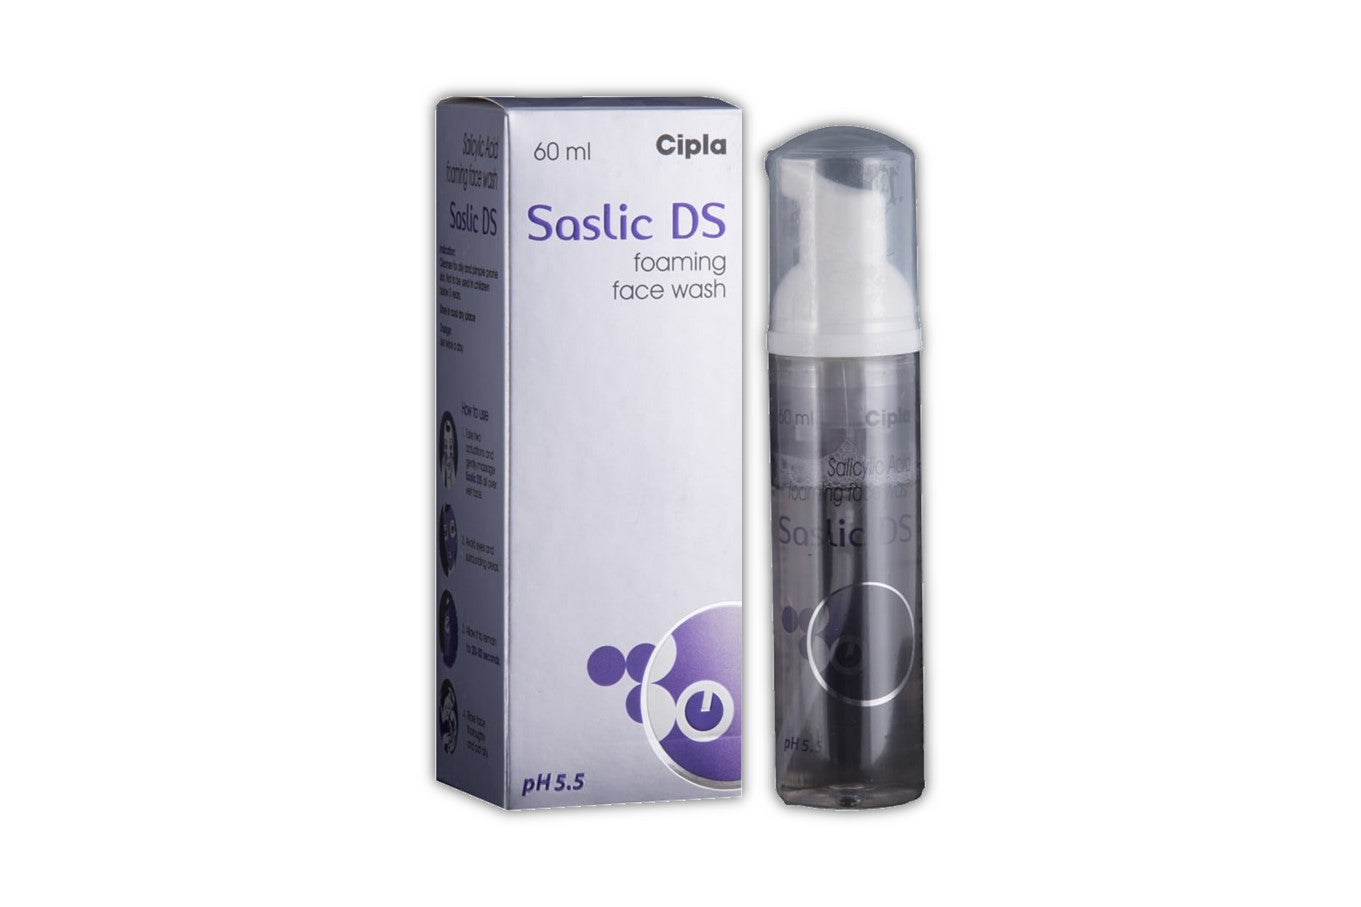 Saslic DS Foaming Face Wash 60ml (Pack of 2)